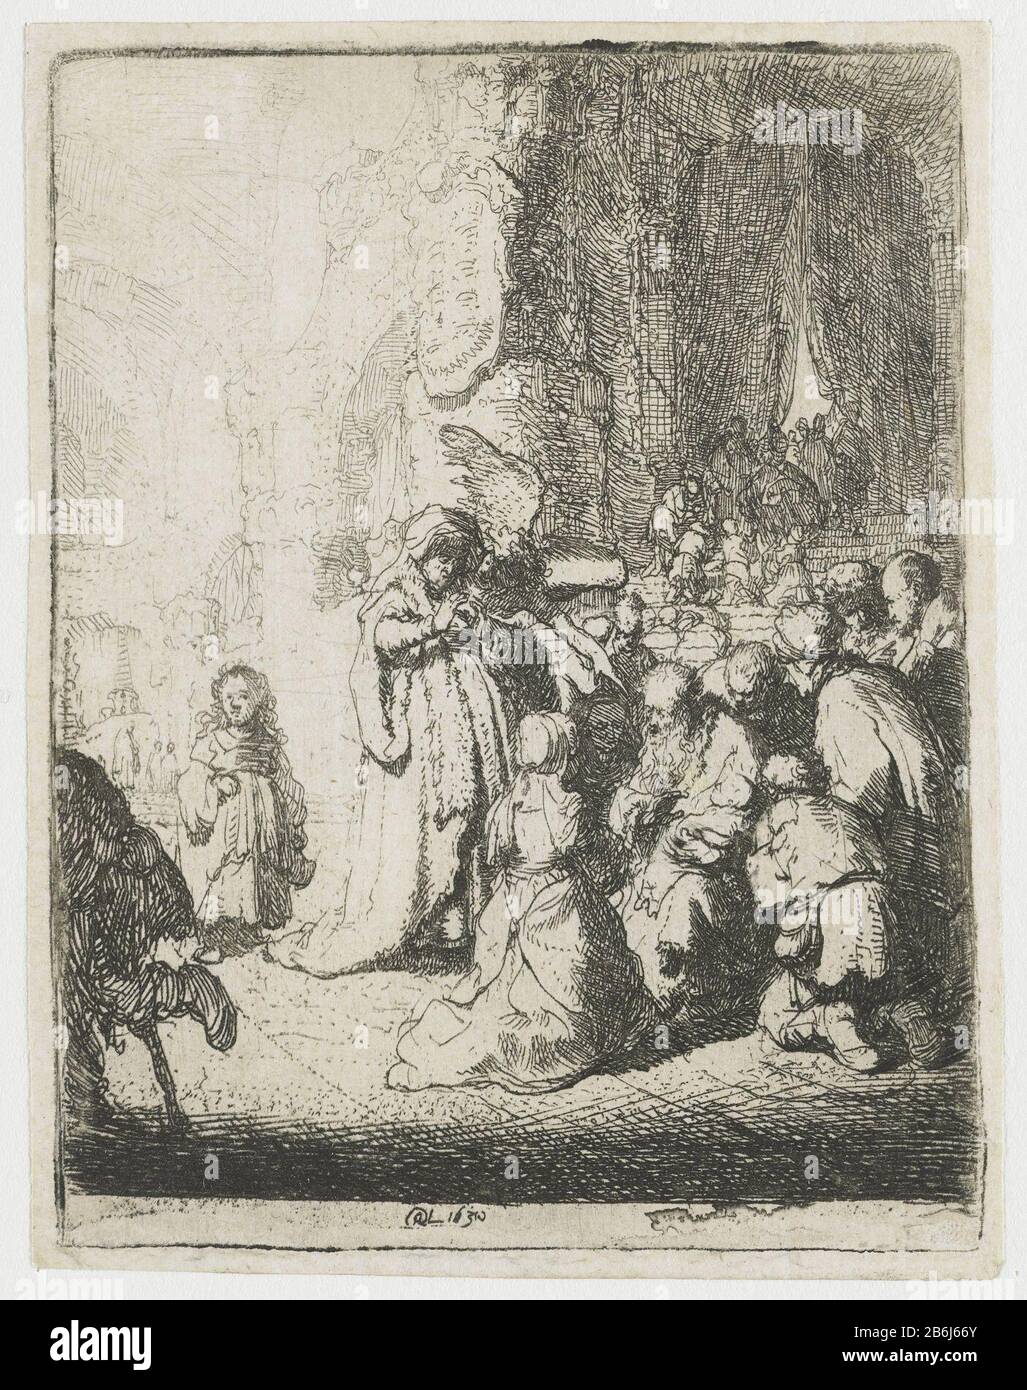 The presentation in the temple with the angel The presentation in the temple with the angel Object type: picture Item number: RP-P-1961-1012Catalogusreferentie: New Hollstein Dutch 54-2 (2) Bartsch 51-2 (2) Hollstein Dutch 51-2 (2 ) Markings / Brands: monogram and date, bottom center: 'RHL 1630'opschrift, verso middle pencil:' John Barnard Collection / Arozarena Collection'merk, verso center below: Lugt 2228merk, verso center below: Lugt 109inscriptie, verso right: 'C. 398 (Colnaghi number) Manufacture Creator: printmaker Rembrandt van Rijn (listed building) in its design: Rembrandt van Rijn D Stock Photo